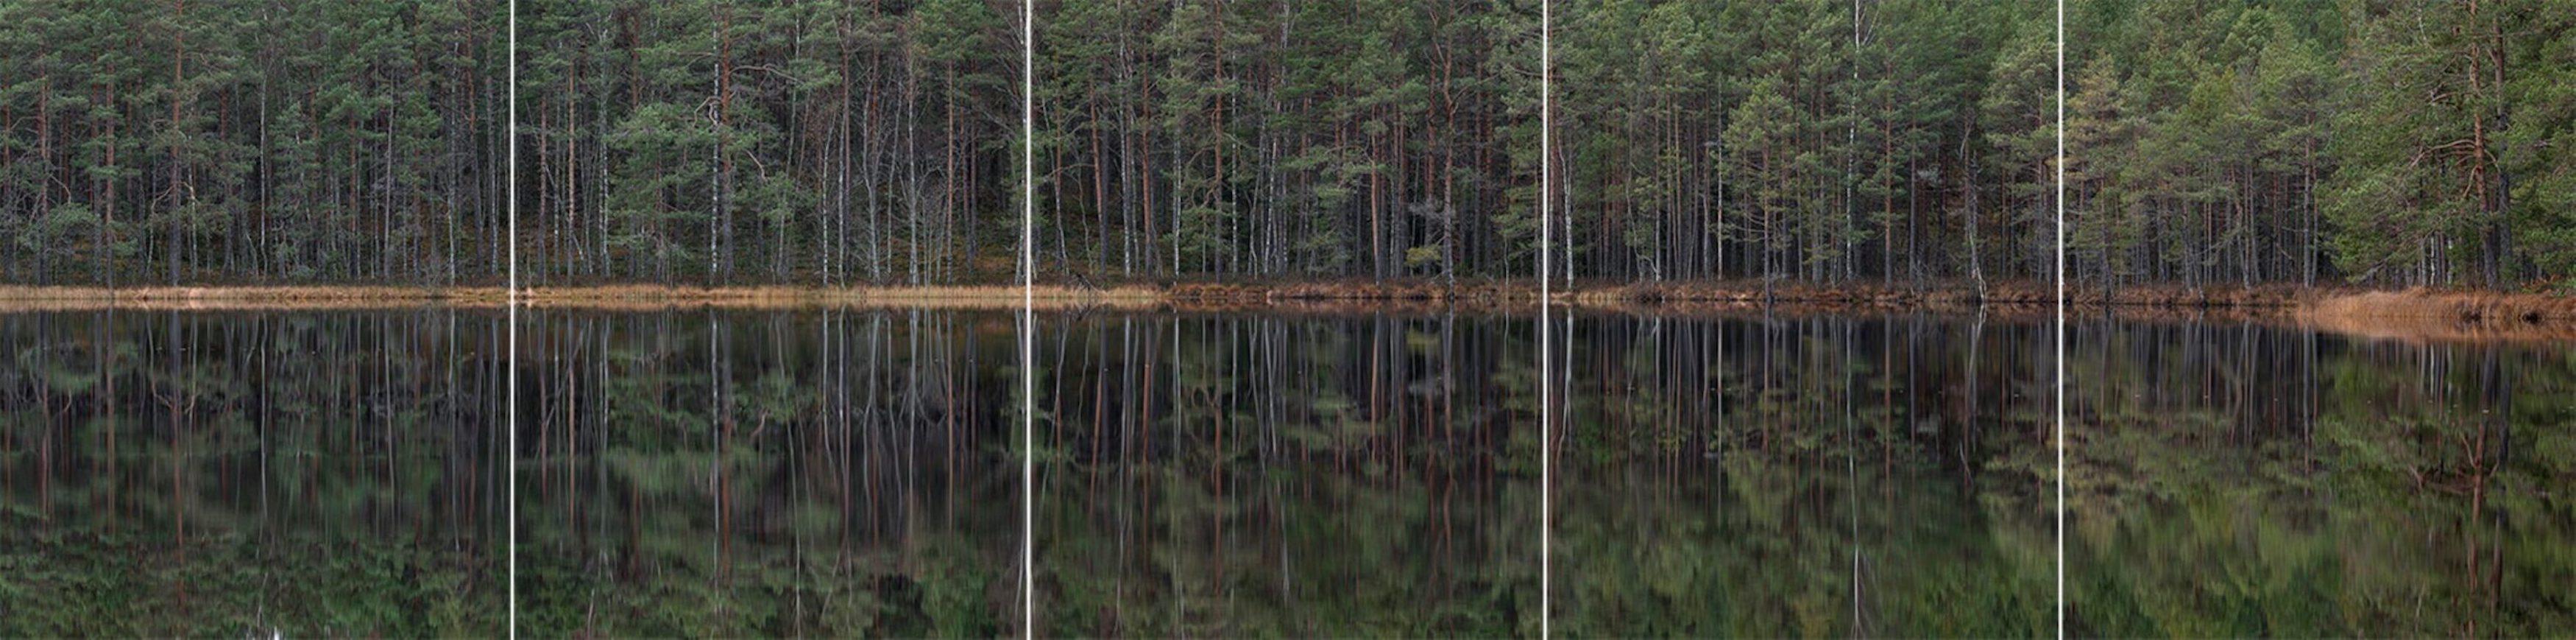 Deep Mirroring Forest 012 by Bernhard Lang - Landscape photography, trees, green For Sale 1